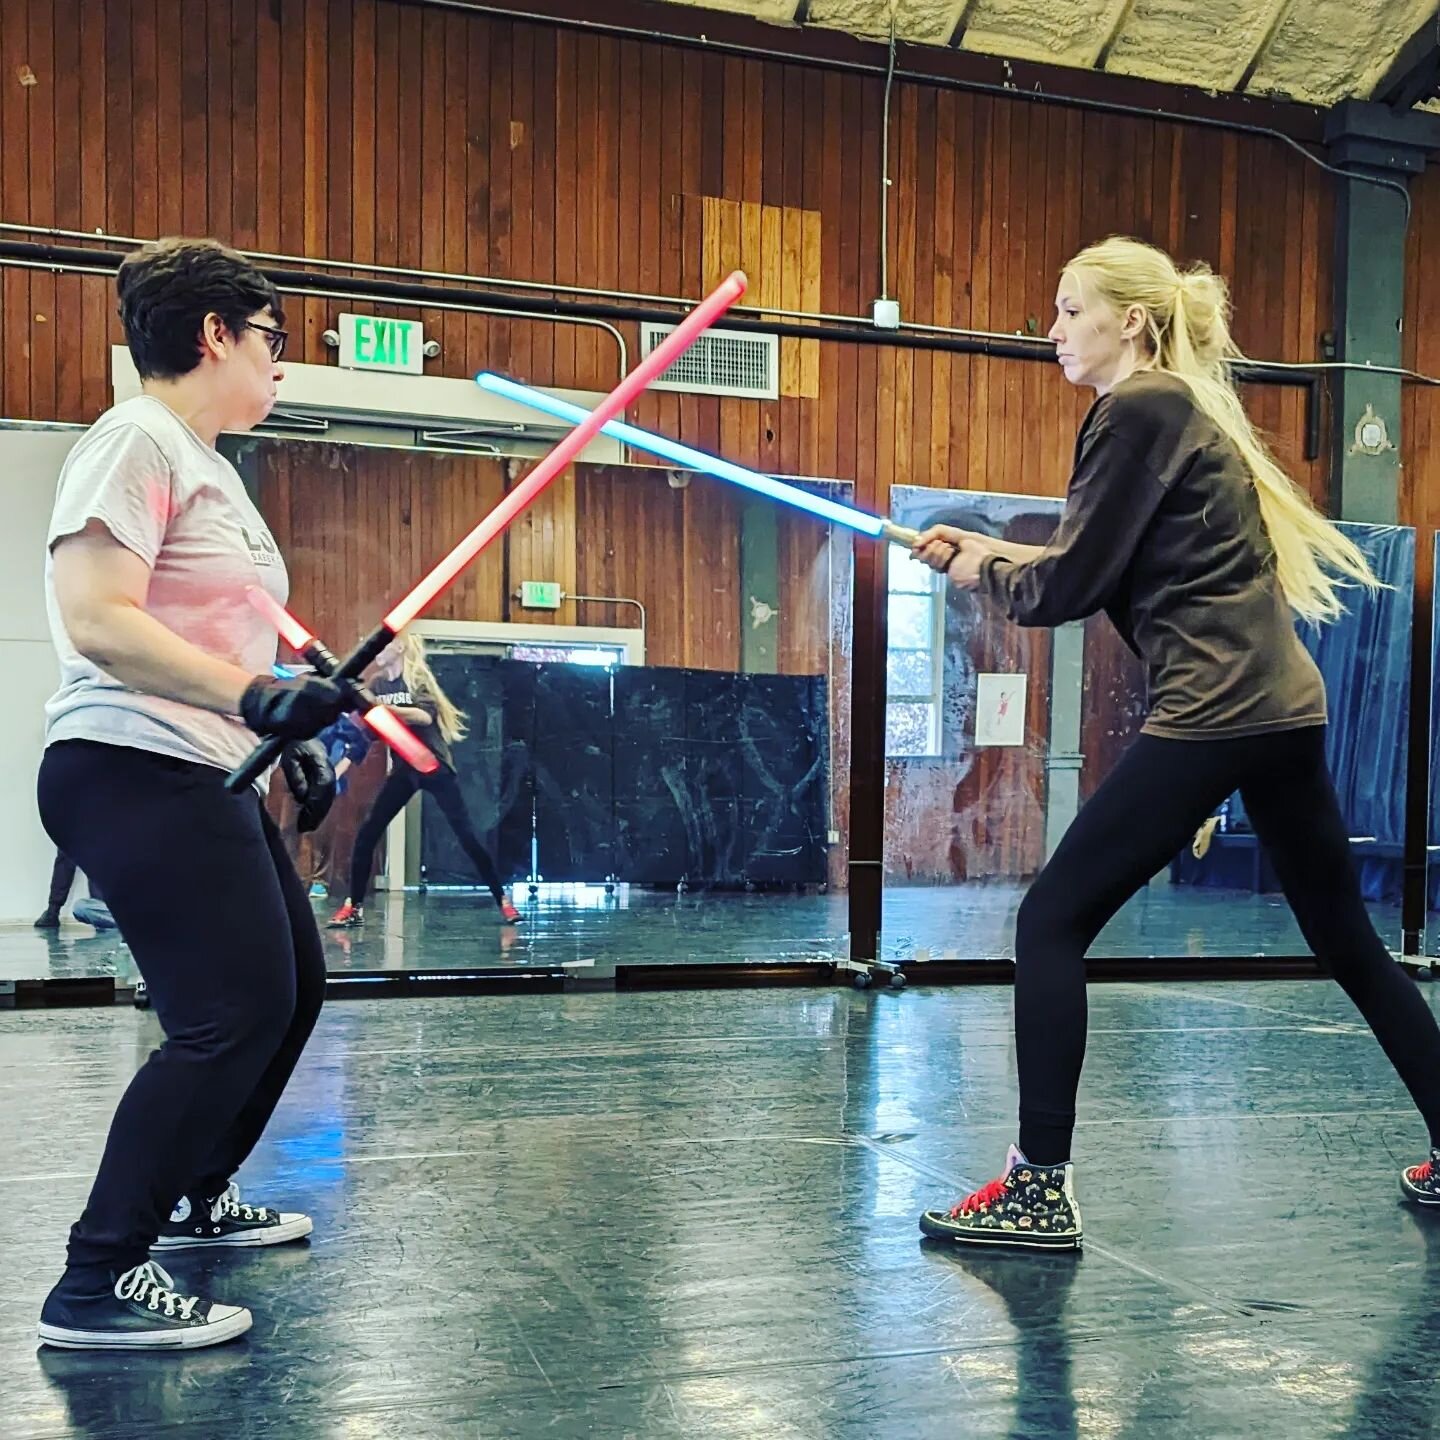 Back practicing in the studio! Classes through August. We would be honored if you would join us. Luxsabercorps.com

#luxsabercorps #saberchoreography #starwars #lightsaber